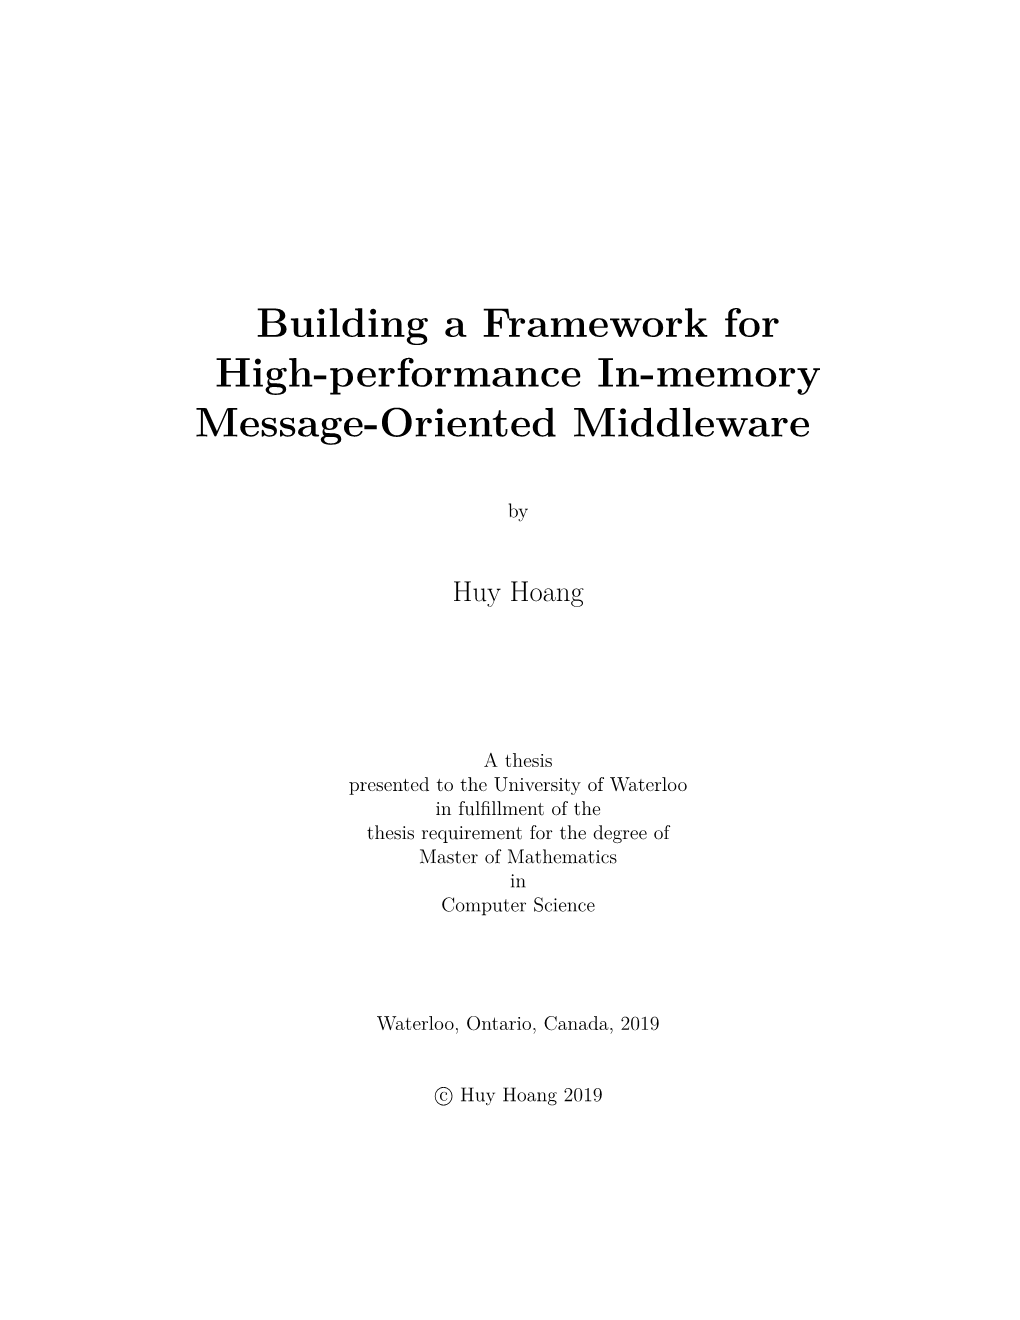 Building a Framework for High-Performance In-Memory Message-Oriented Middleware